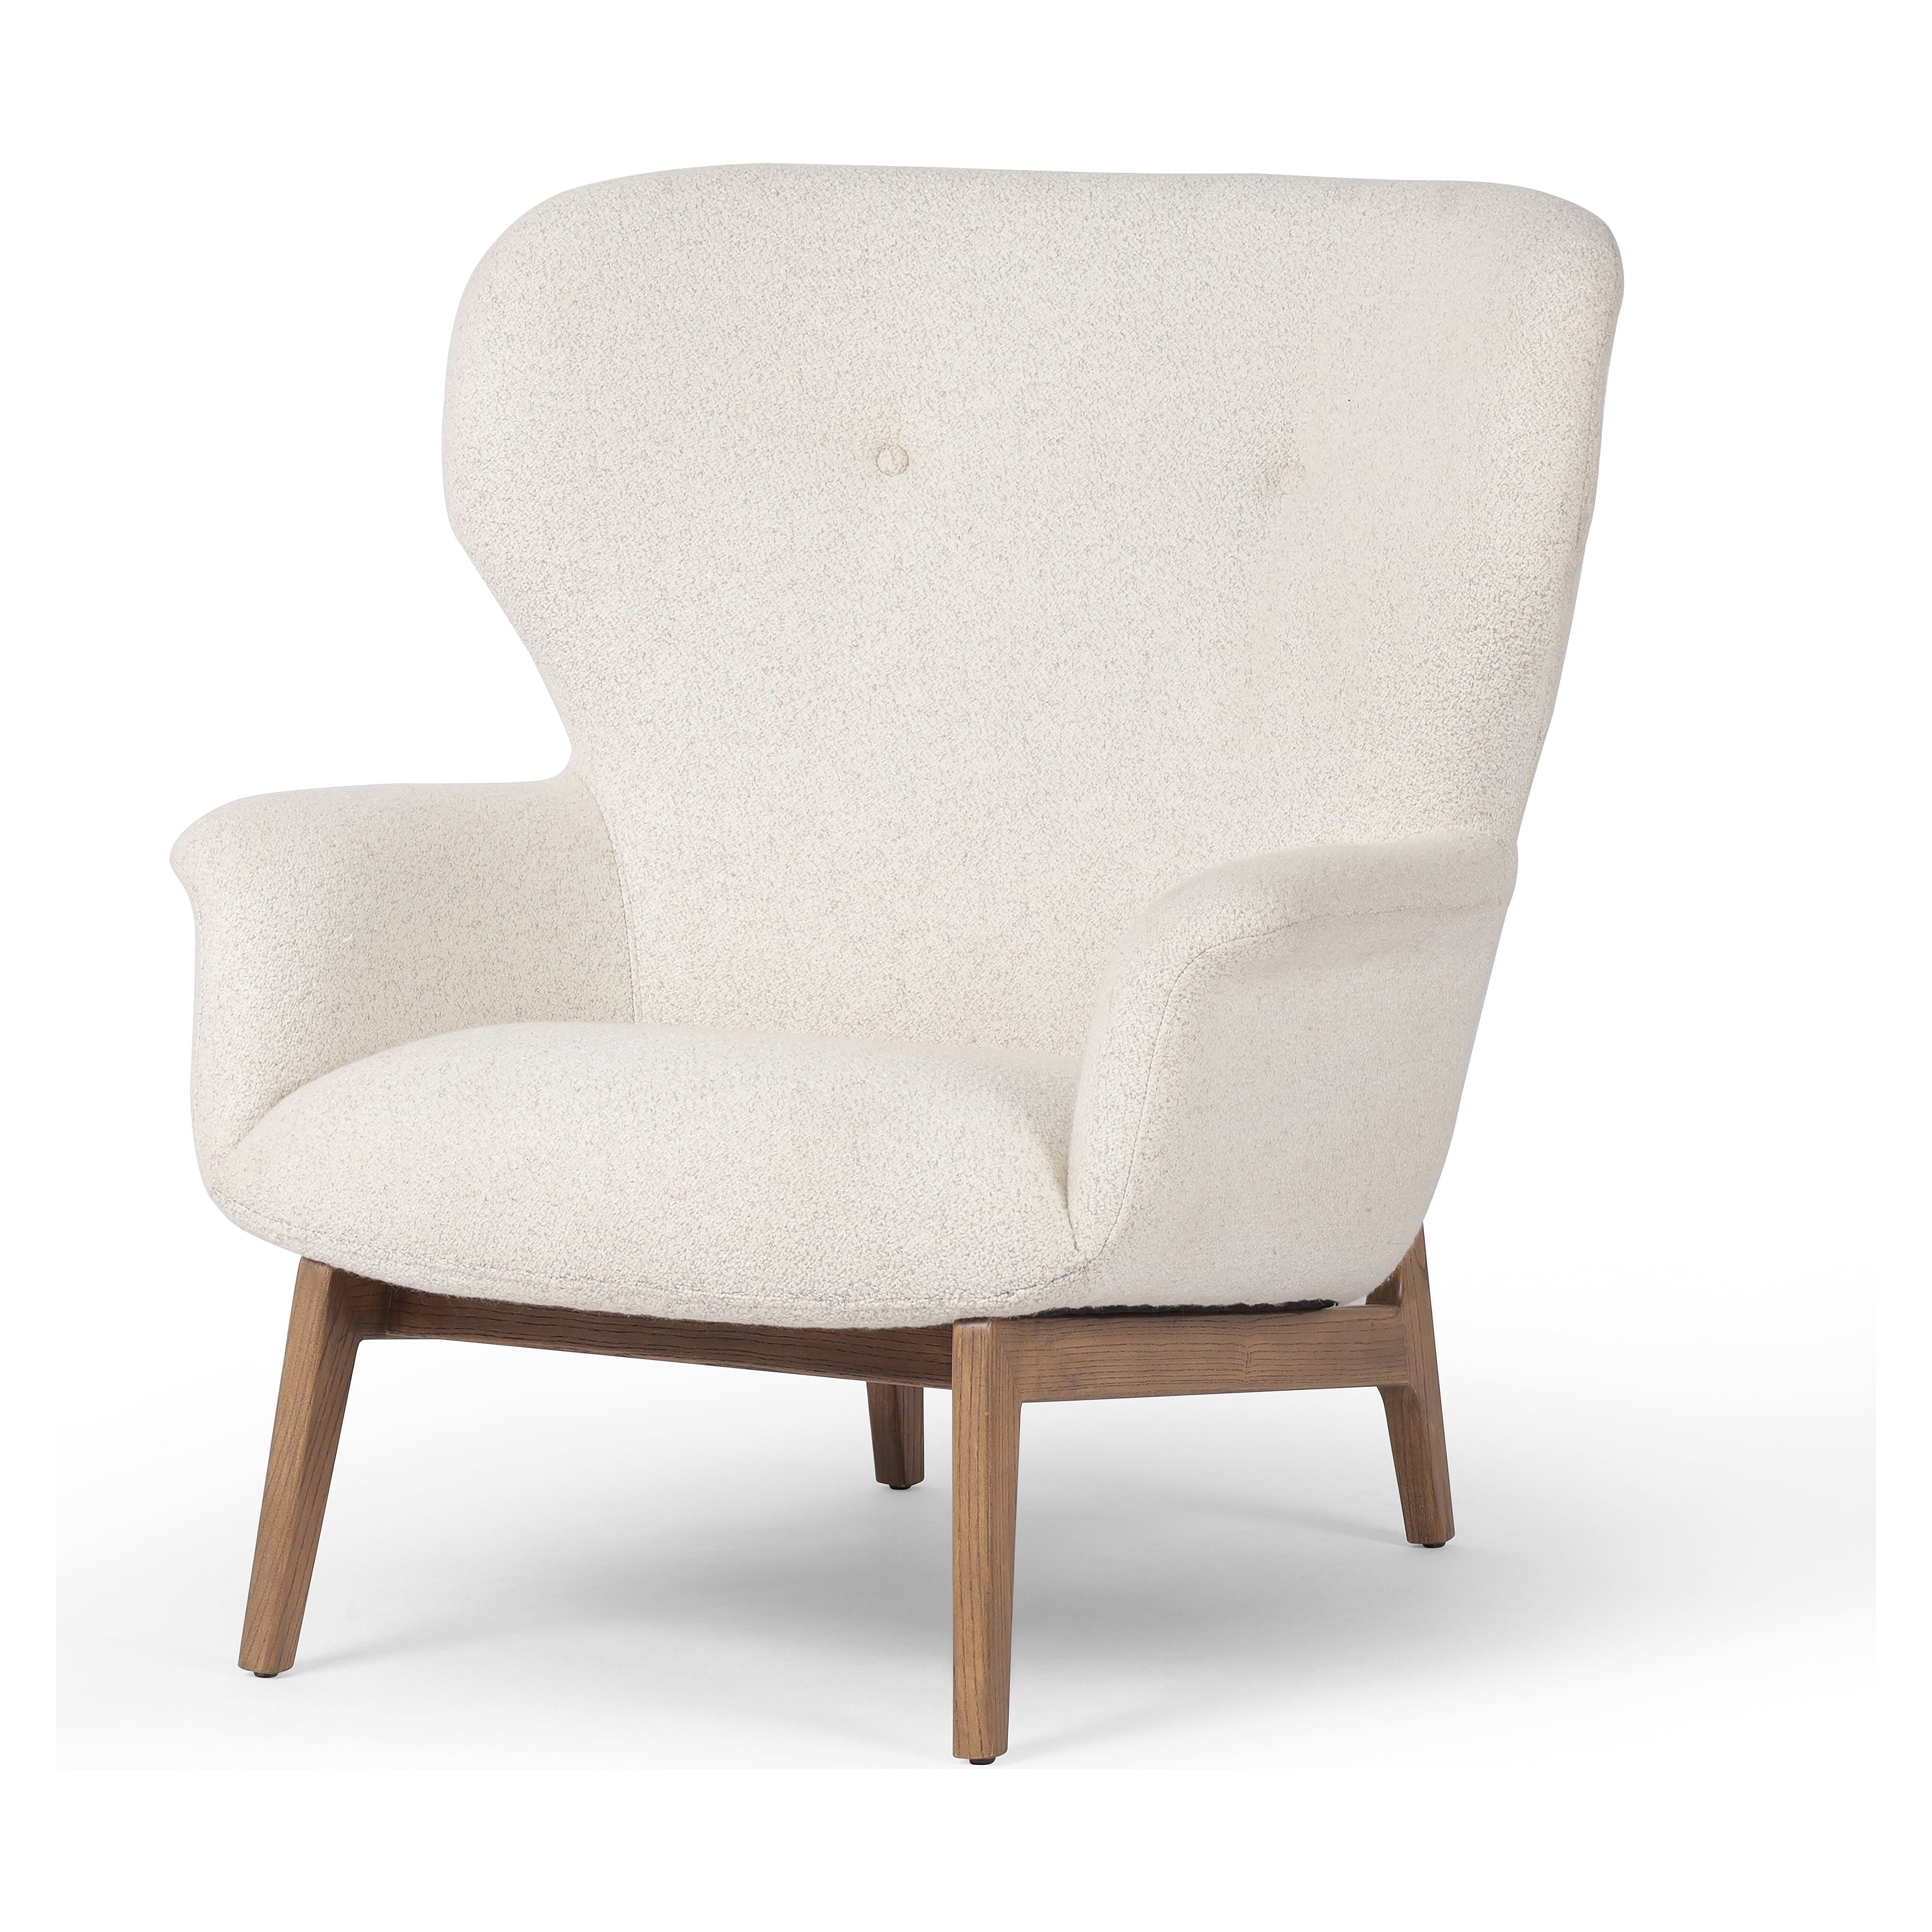 The classic wingback chair is updated with a midcentury-style base. Flared arms and a high winged back with blind tufting offer all-around comfort. Upholstered in a heavily textured boucle performance fabric bringing movement and everyday function to the piece. Amethyst Home provides interior design, new construction, custom furniture, and area rugs in the Laguna Beach metro area.